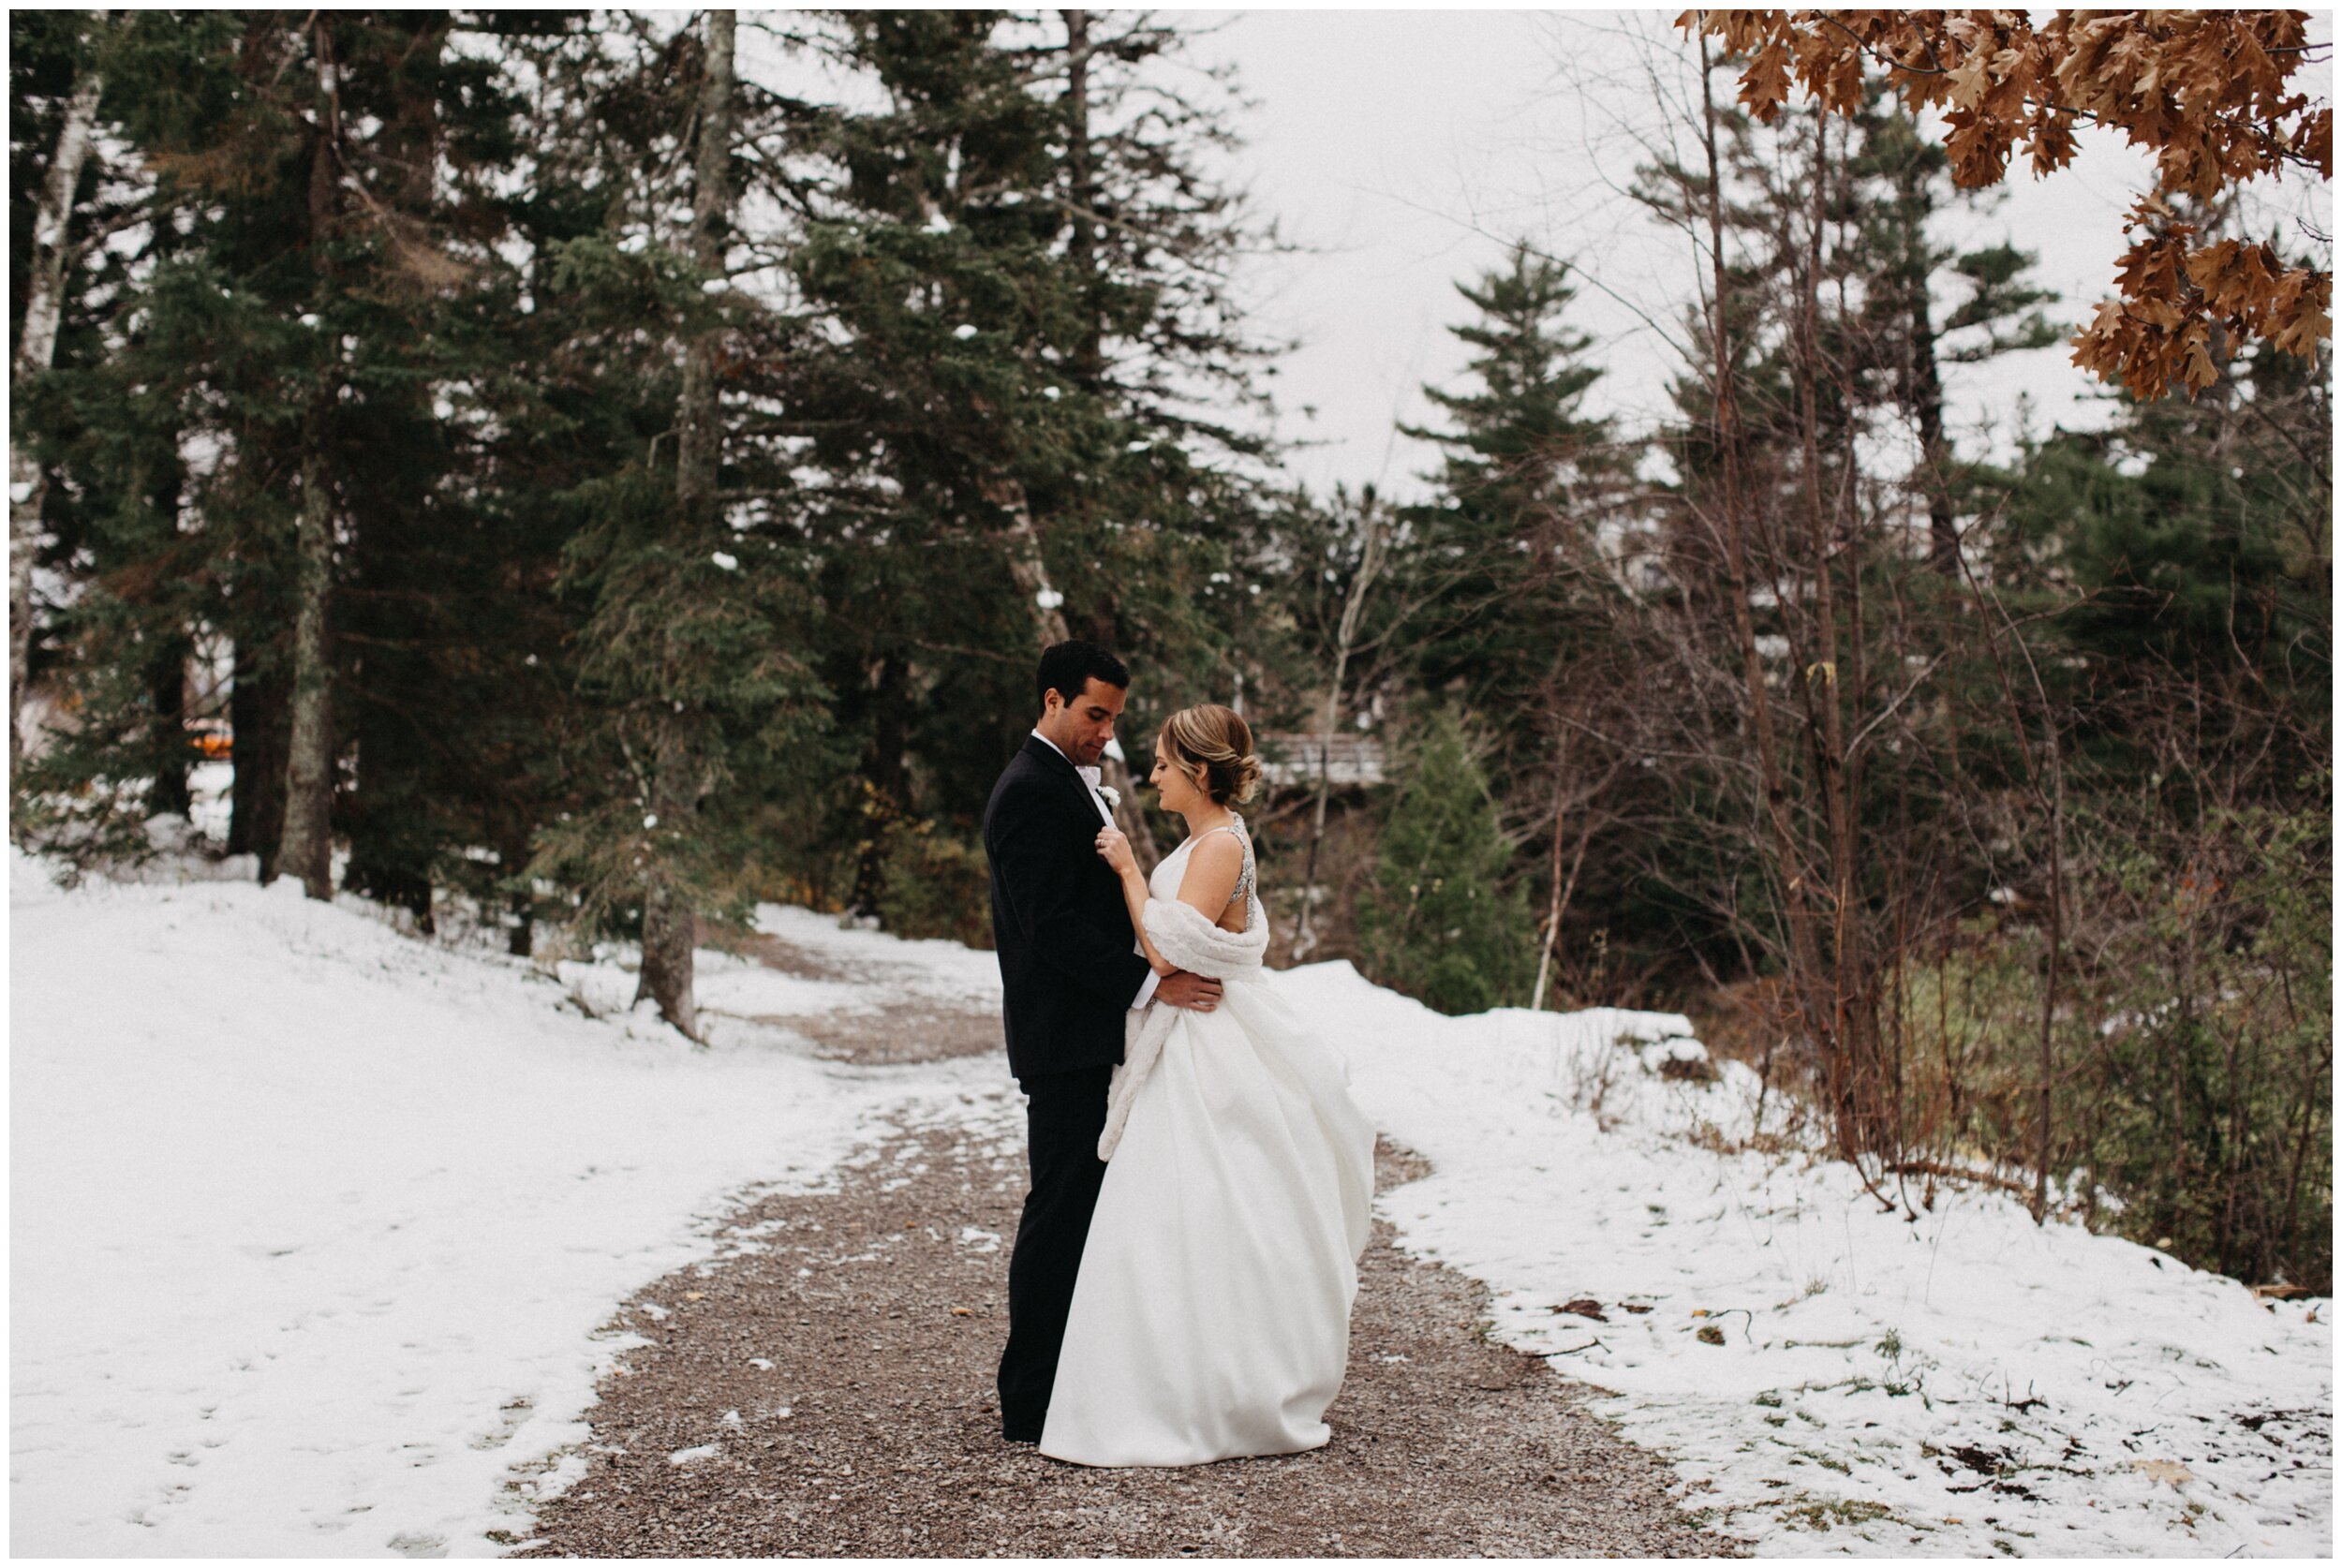 Bride and groom standing in snowy park in Duluth, Minnesota